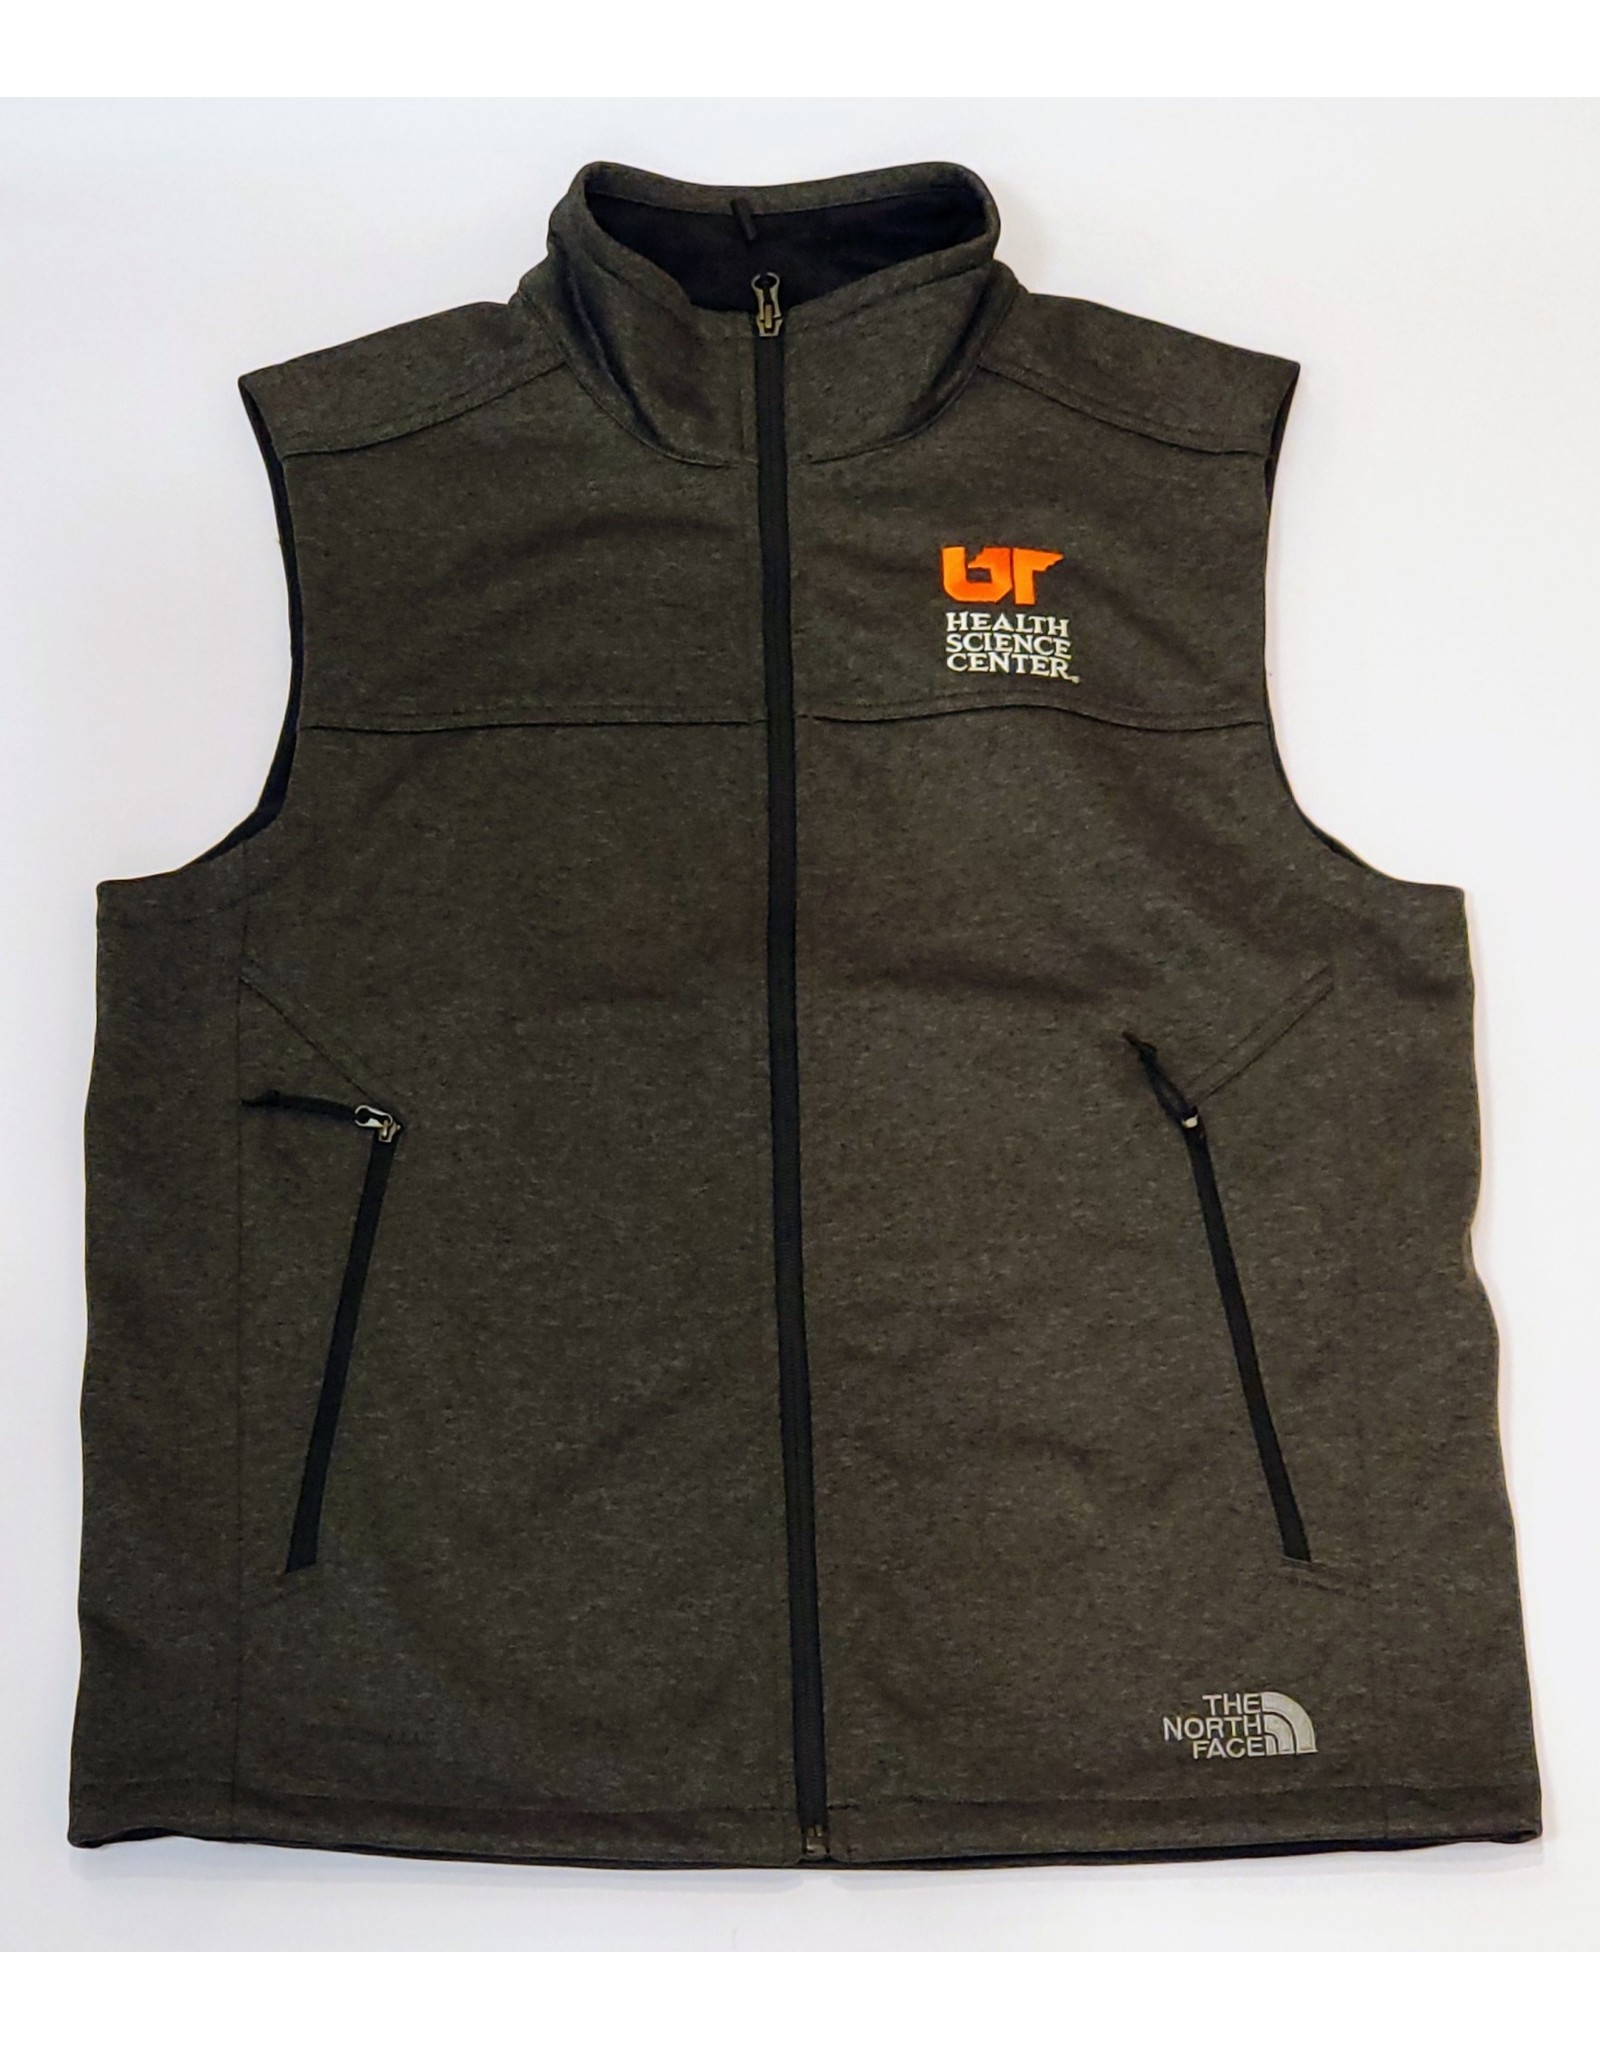 NORTH FACE NORTH FACE RIDGEWALL SOFT SHELL VEST - HEATHER GREY